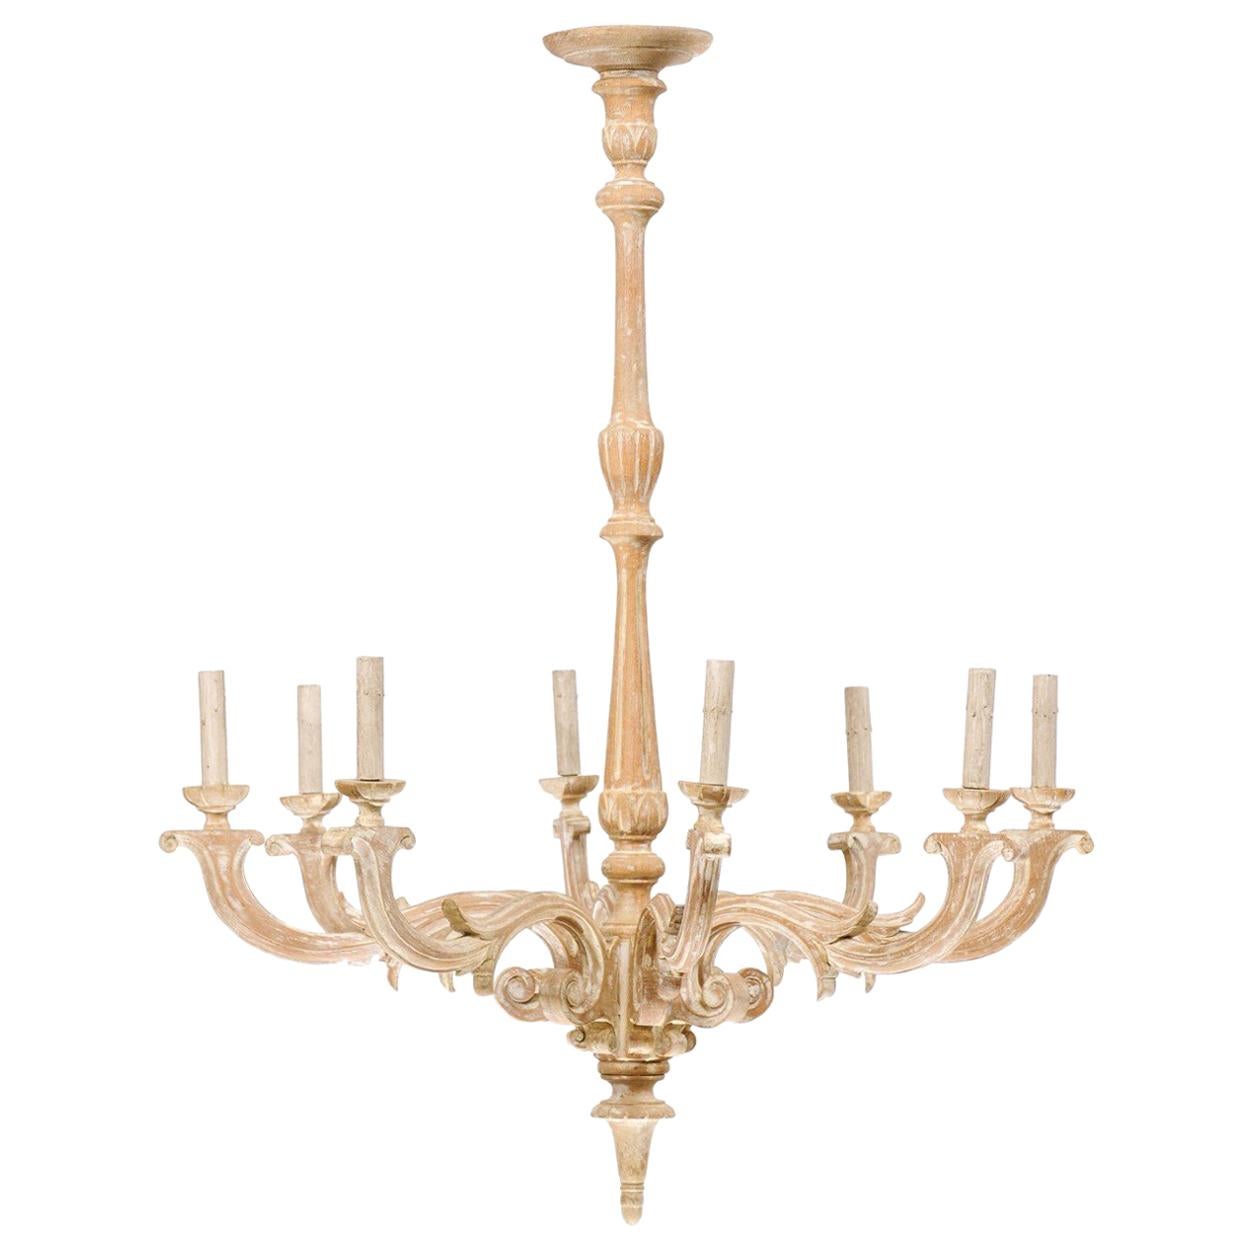 French Mid-20th Century Carved Wood Chandelier with White Painted Accents